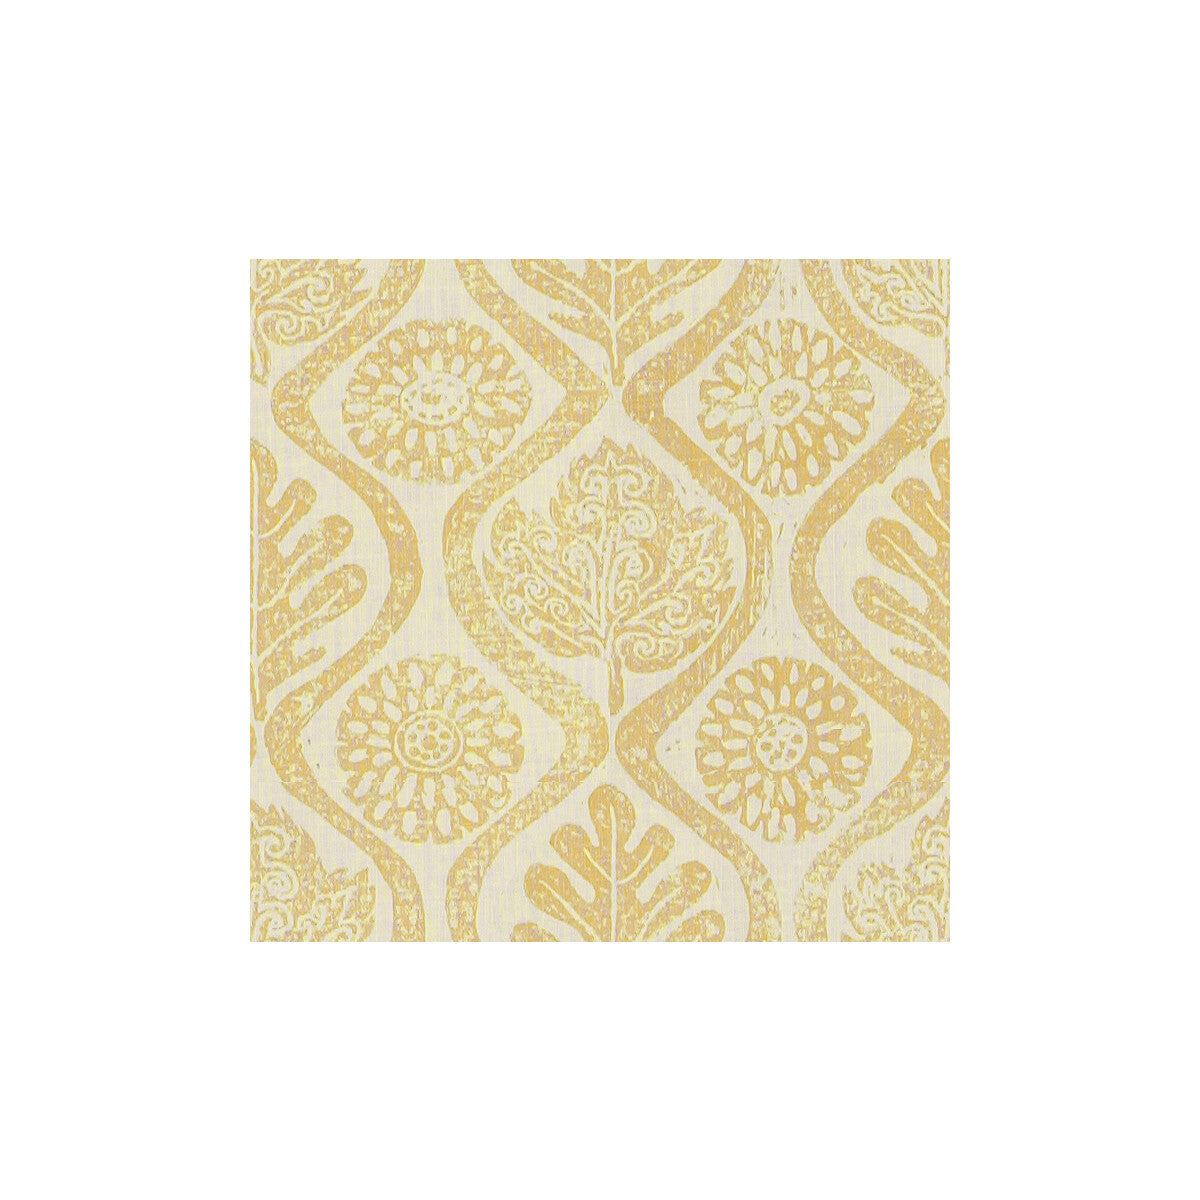 Oakleaves fabric in yellow color - pattern BFC-3514.14.0 - by Lee Jofa in the Blithfield collection